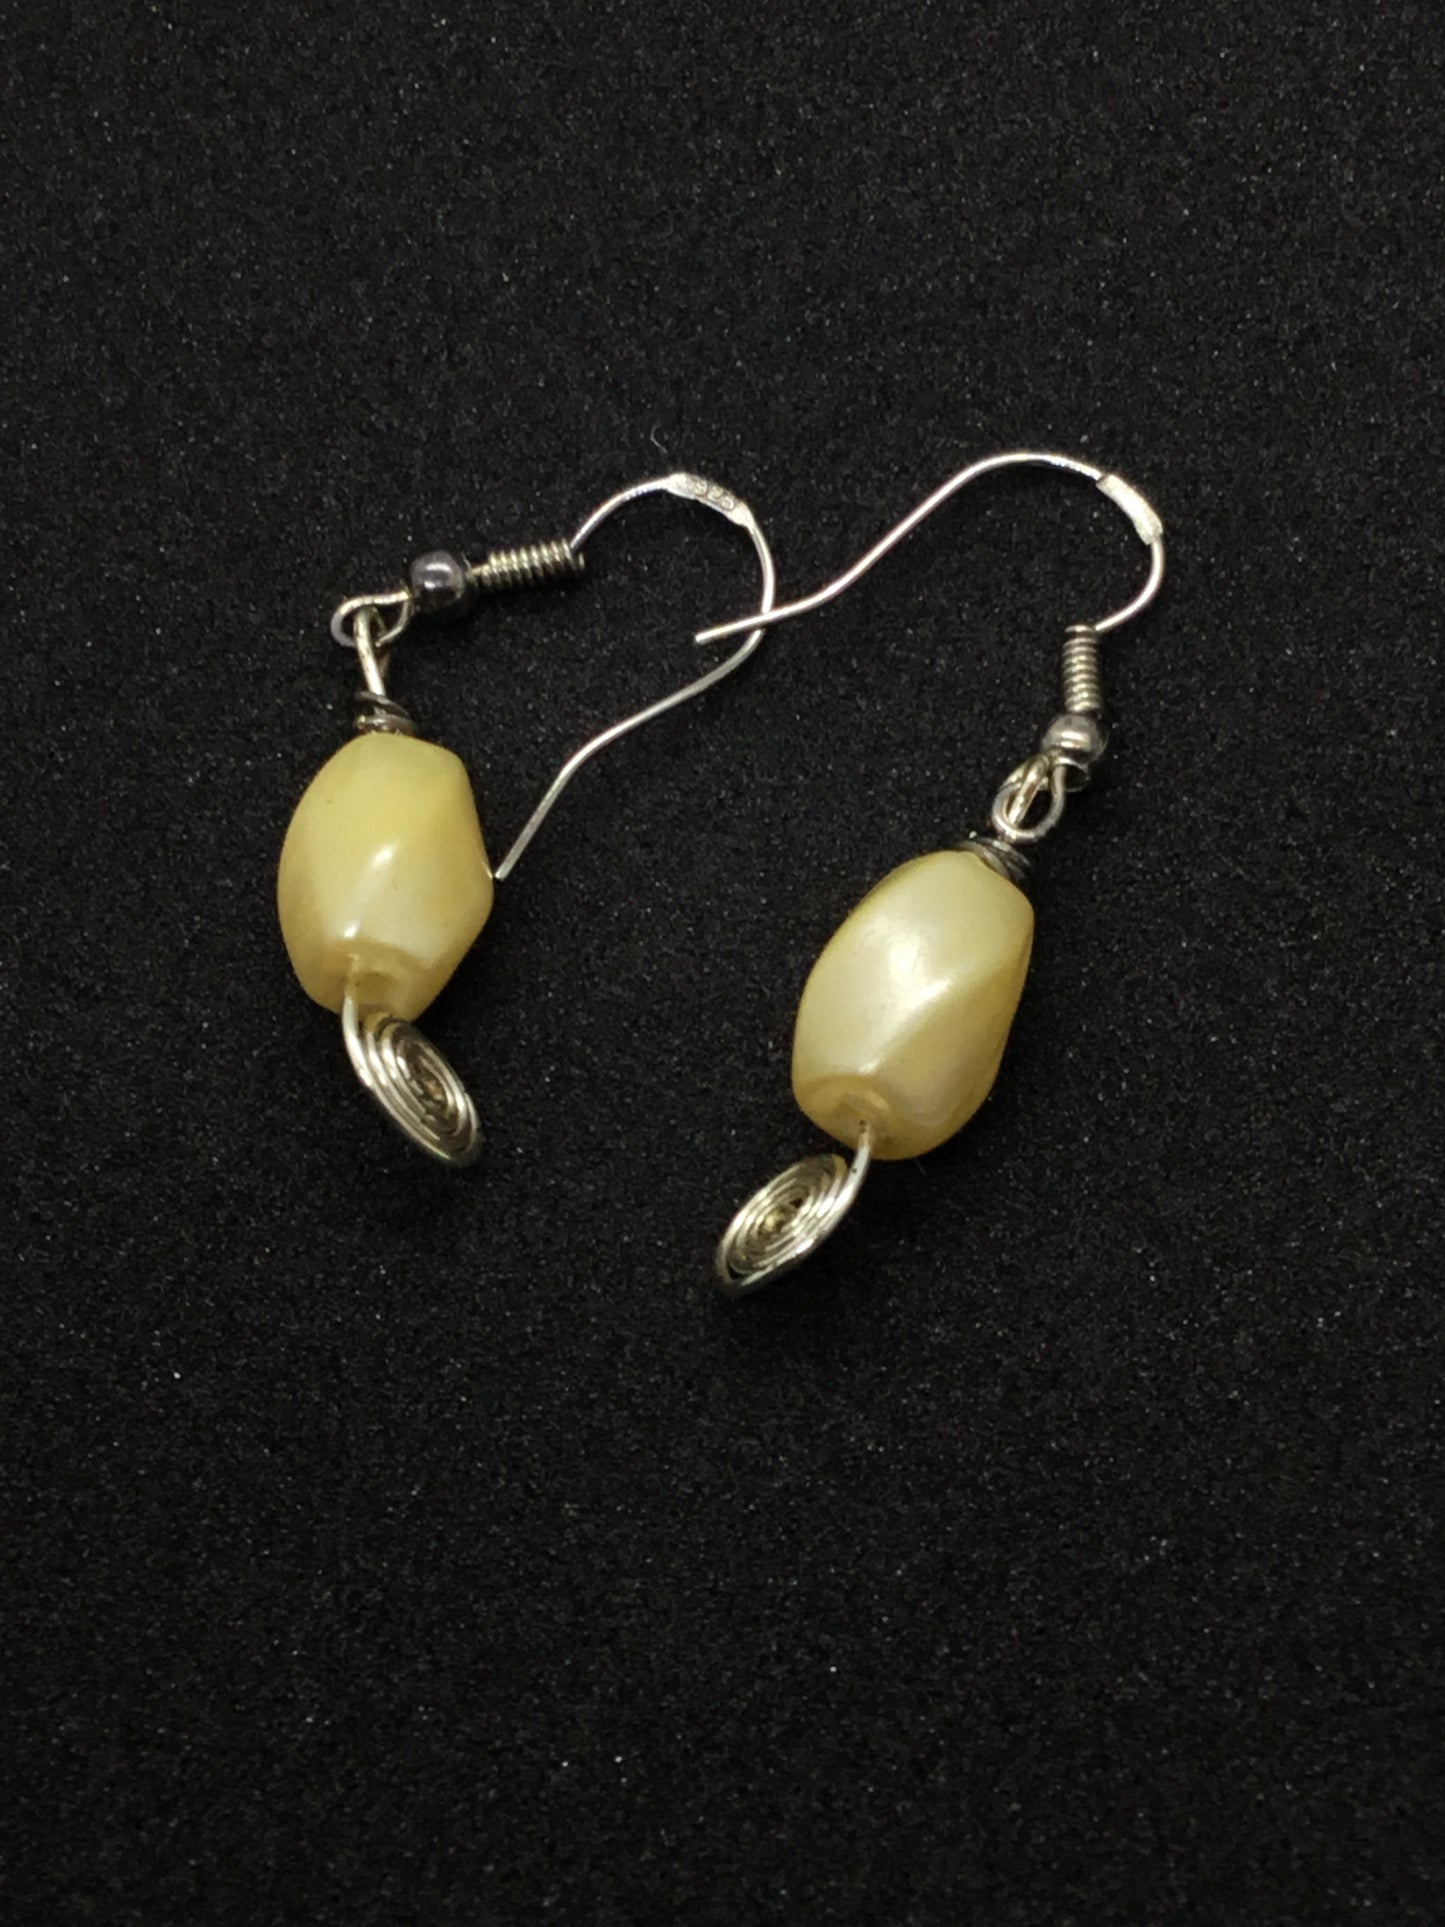 Wire & cream bead earrings with silver wire detail